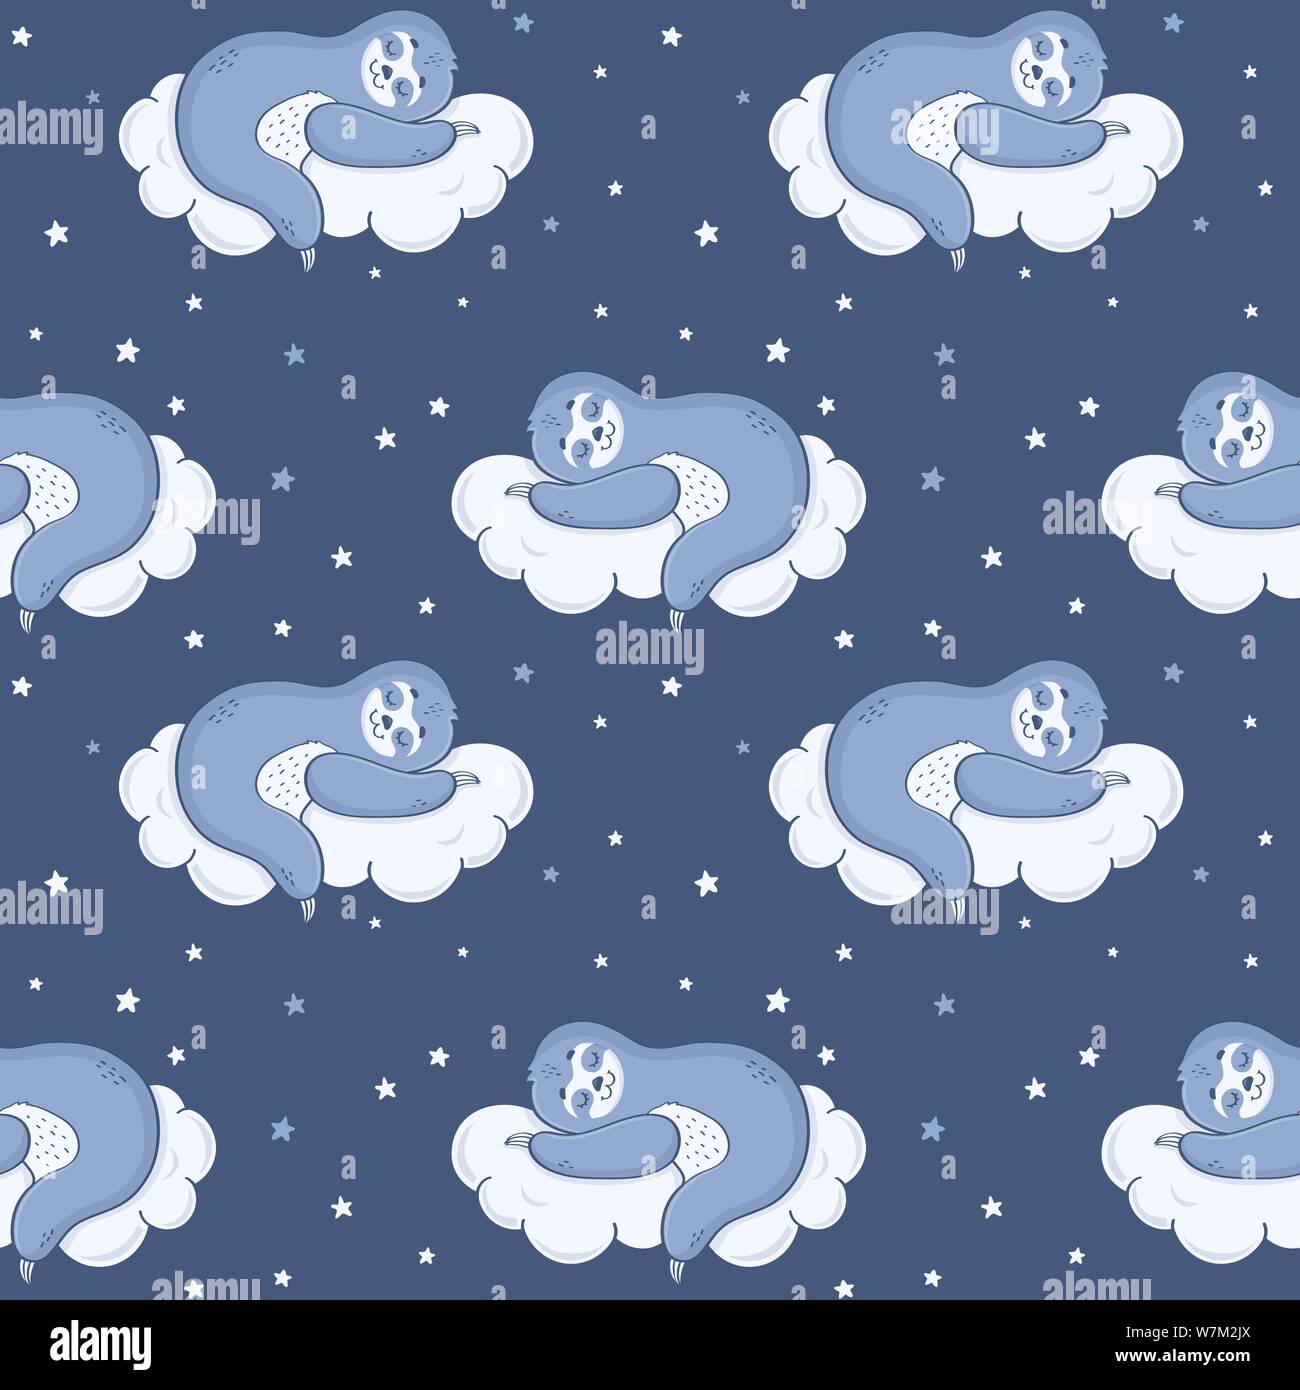 Seamless pattern with cute sloth sleeping on a cloud. Vector background. Stock Vector